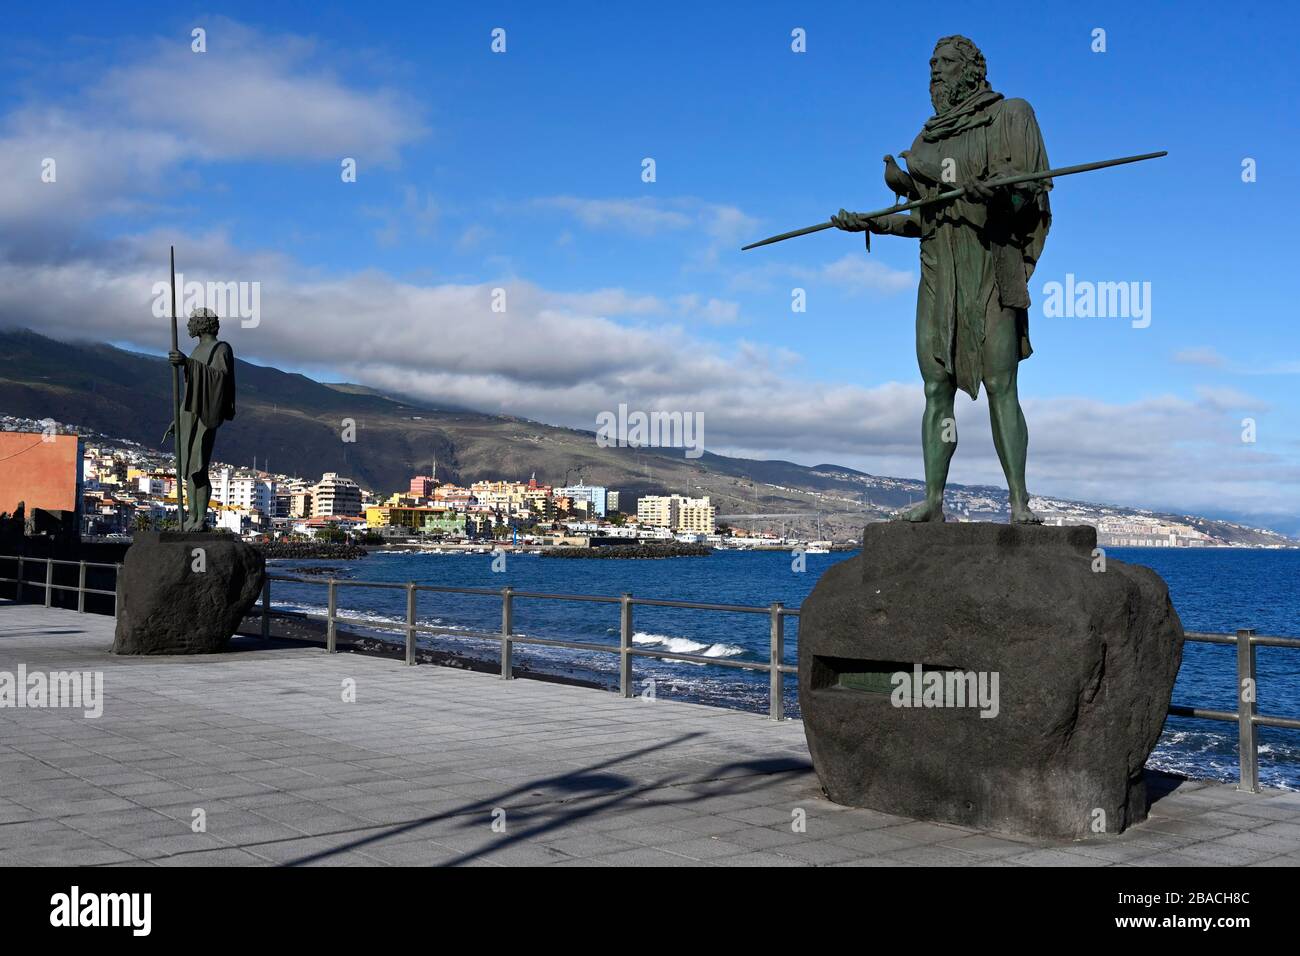 Statue of Anaterve, former king of Guimar, Canarias Square, Candelaria city, Tenerife, Canary Islands, Spain Stock Photo